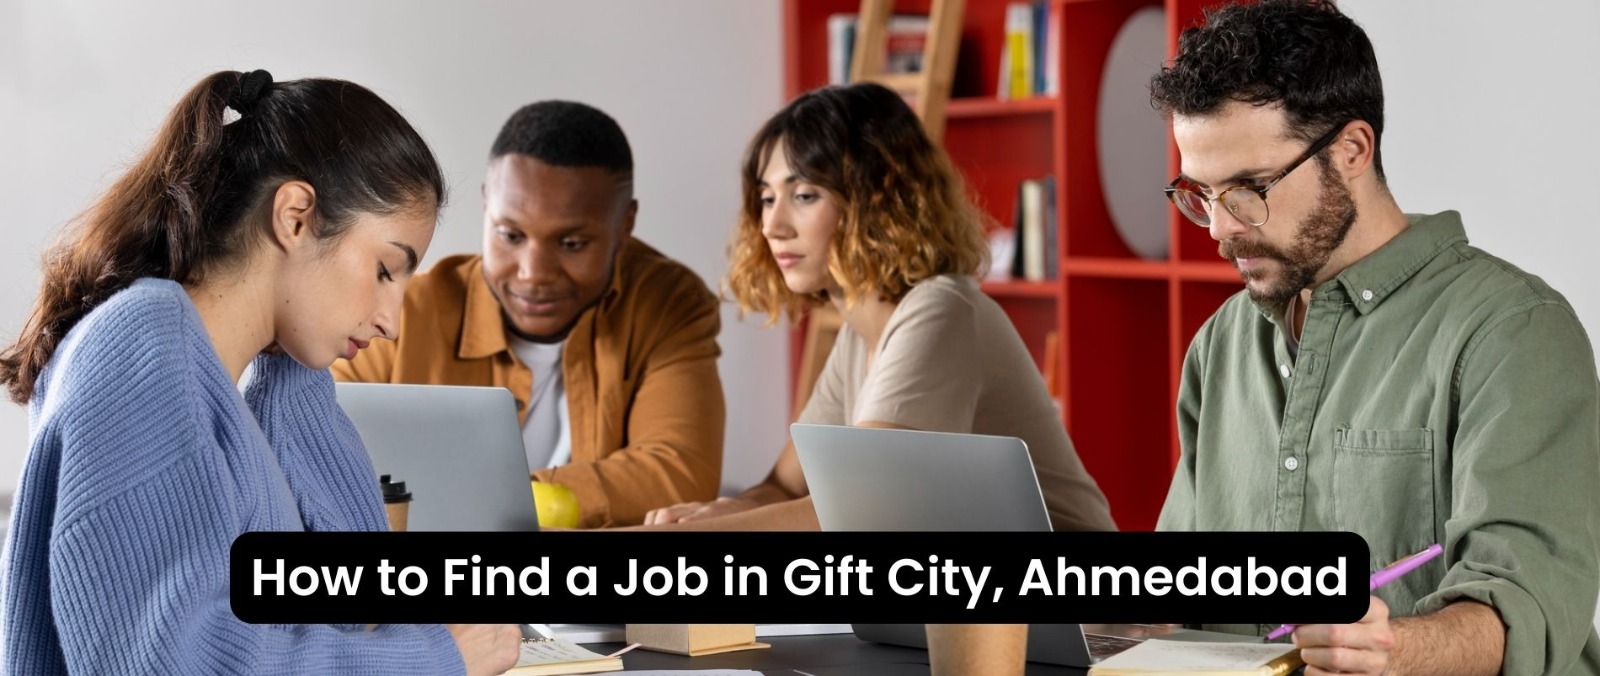 Gift City jobs in Ahmedabad